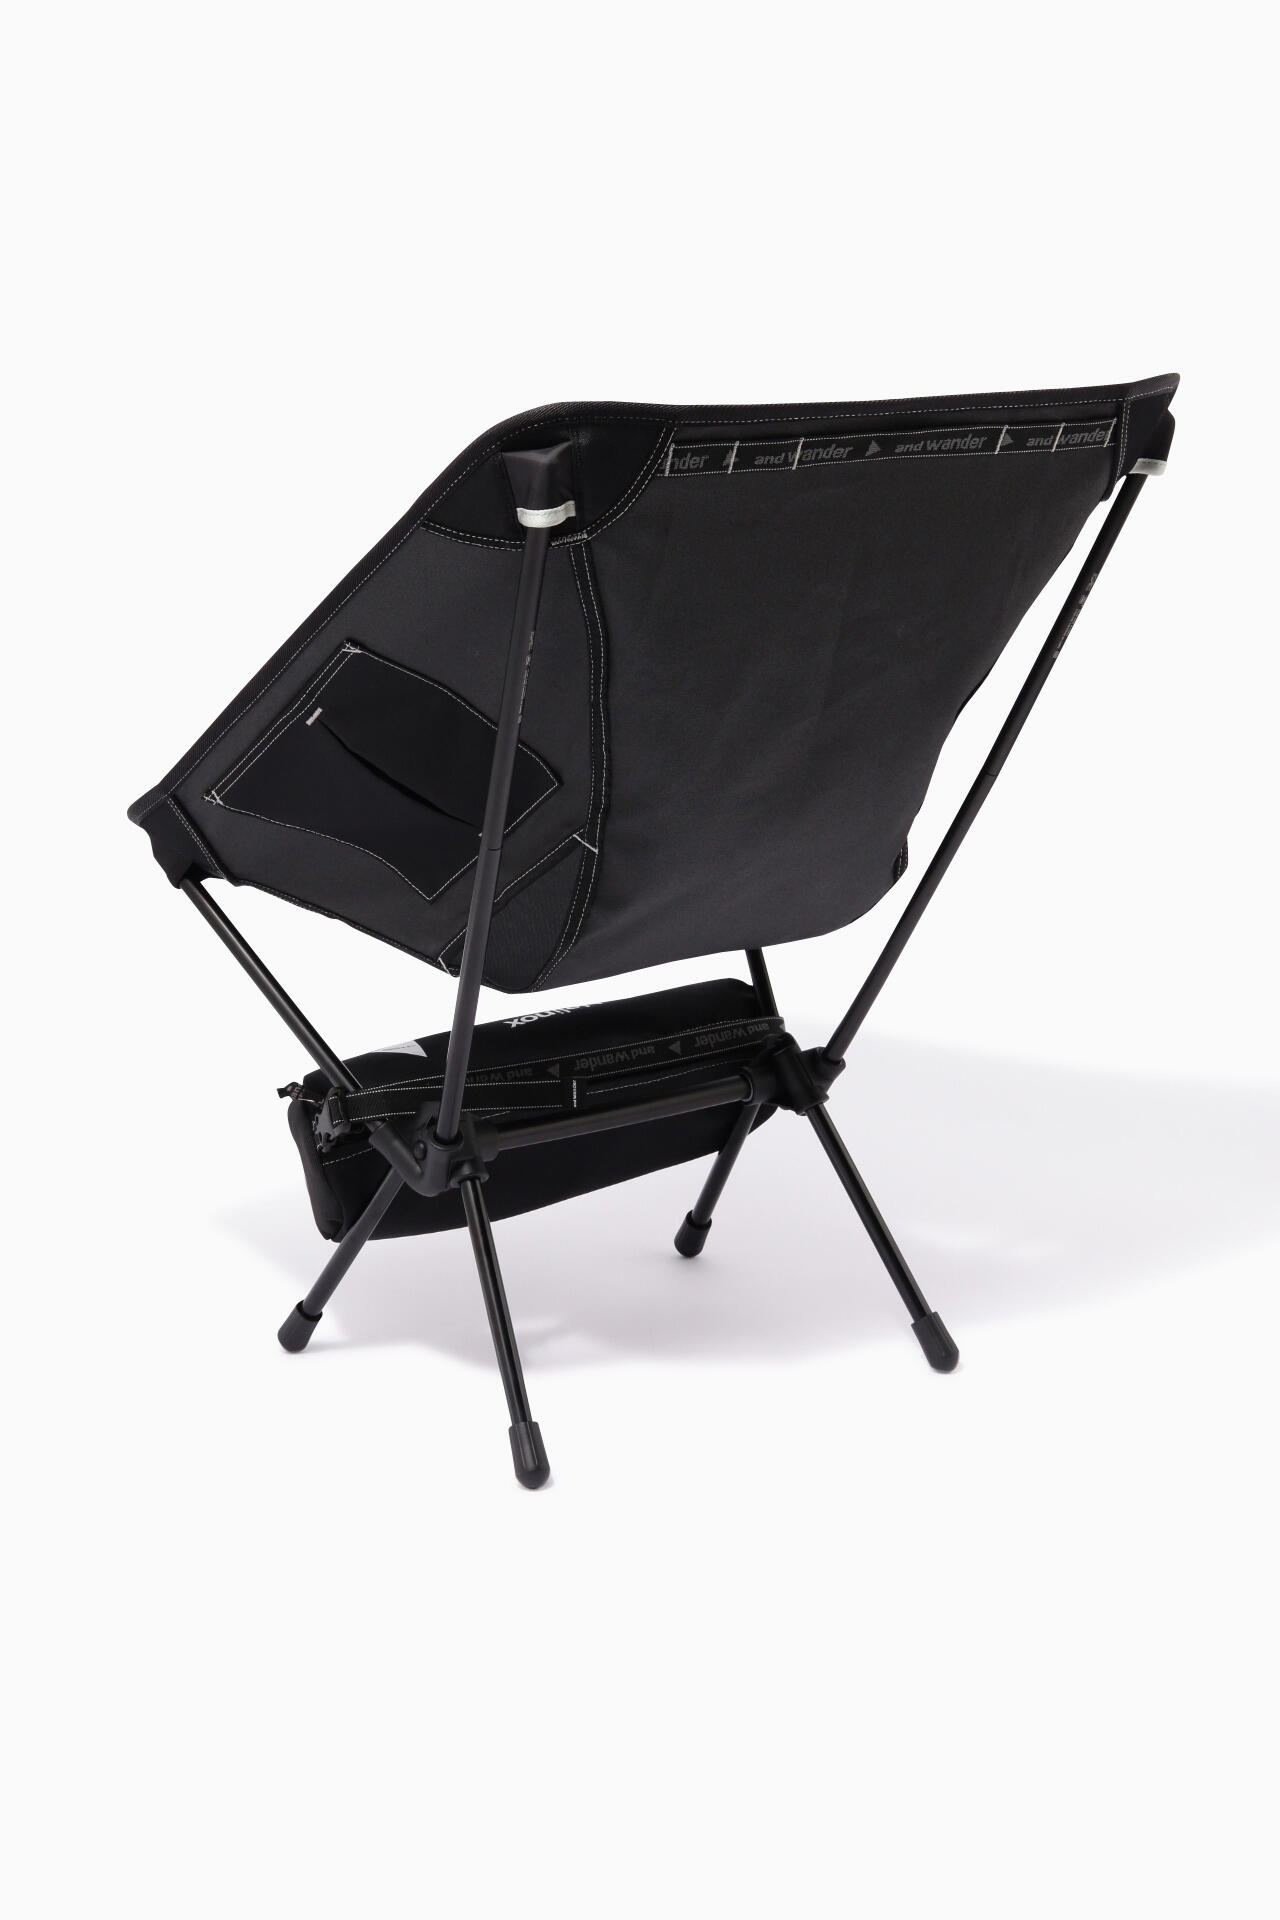 Helinox × and wander folding chair one | goods | and wander ONLINE 